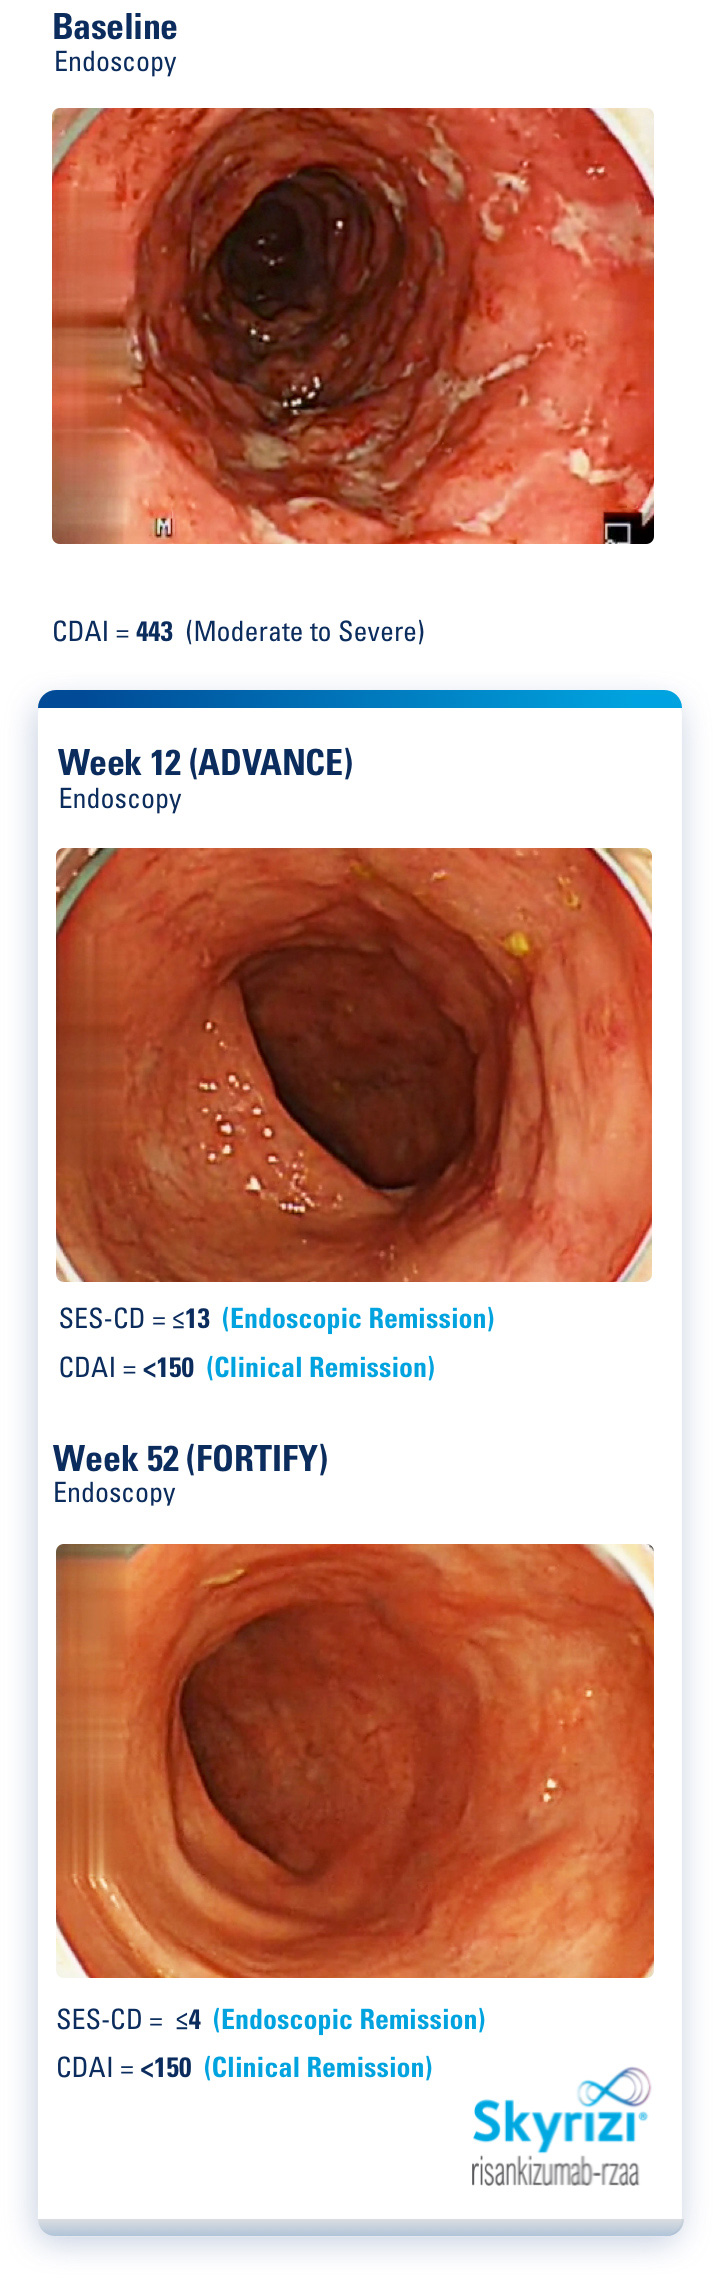 Patient 1: failed a biologic and presented with a severe CD on endoscopy at Weeks 12 and 52